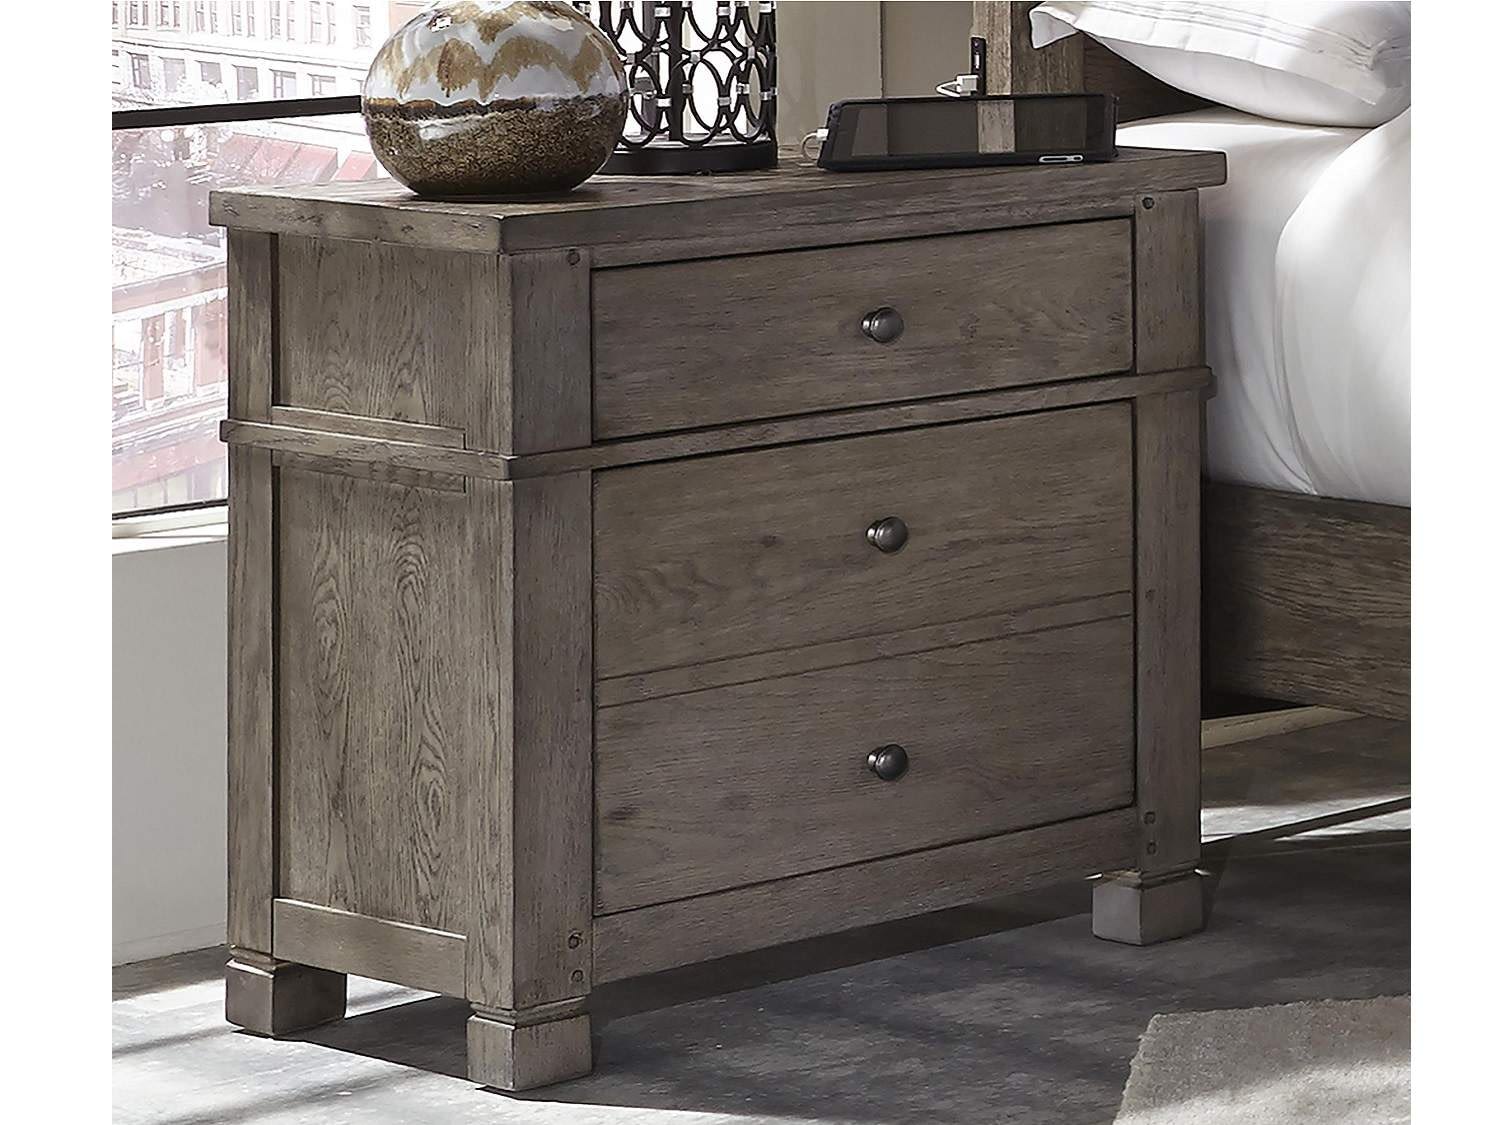 SUMTER Nightstand with Drawers - Zoom